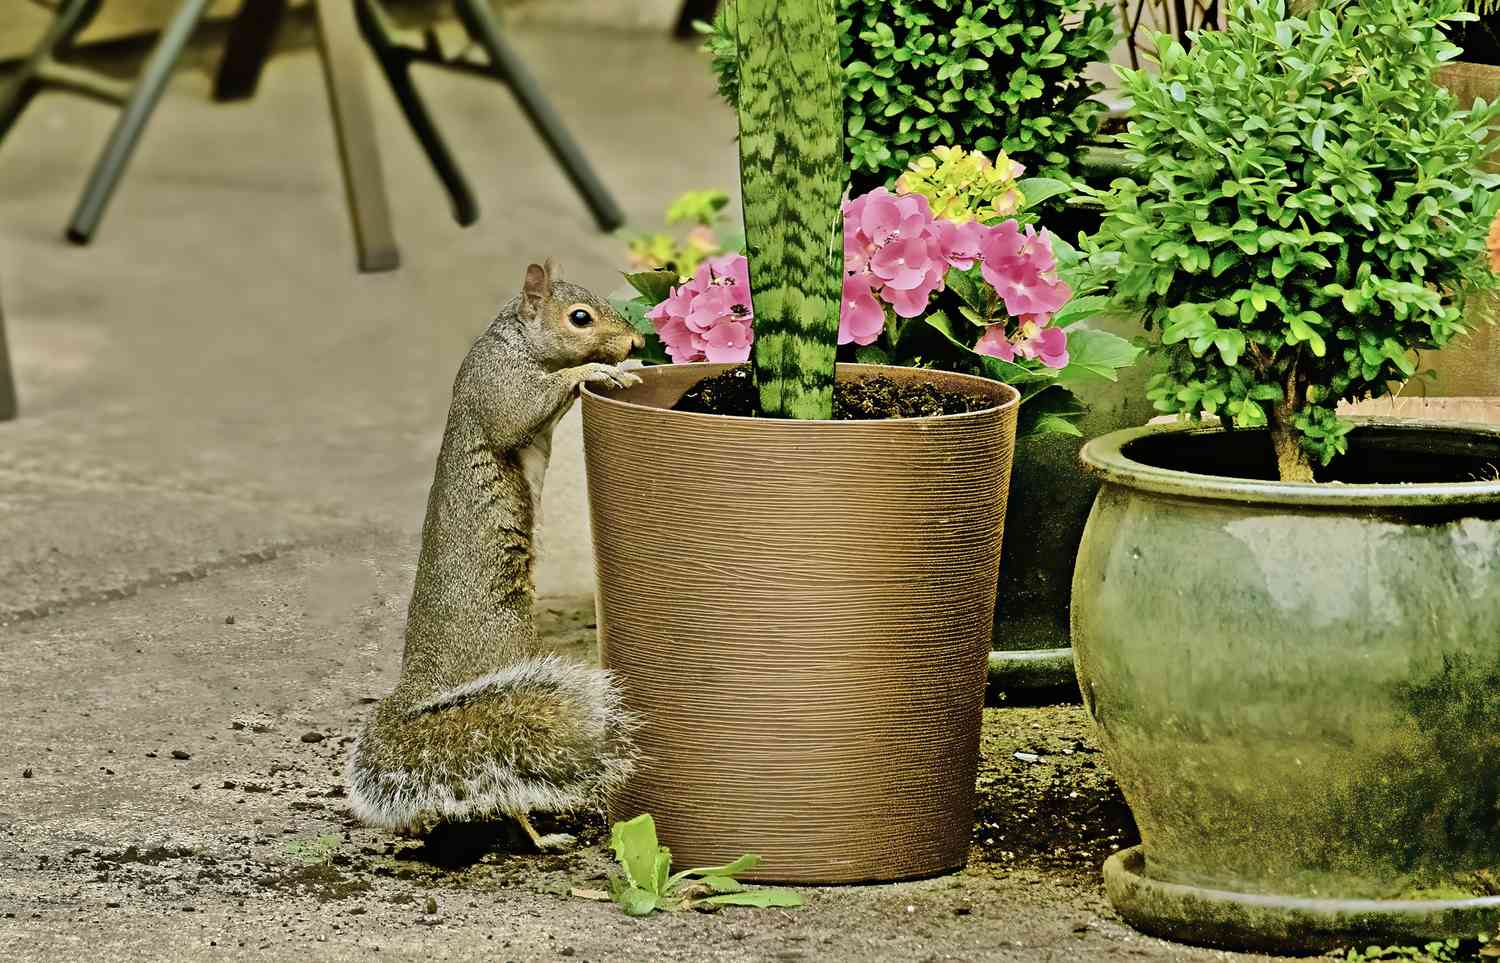 Safeguarding Container Gardens: Effective Squirrel Deterrence Techniques for Ethical and Humane Protection插图2